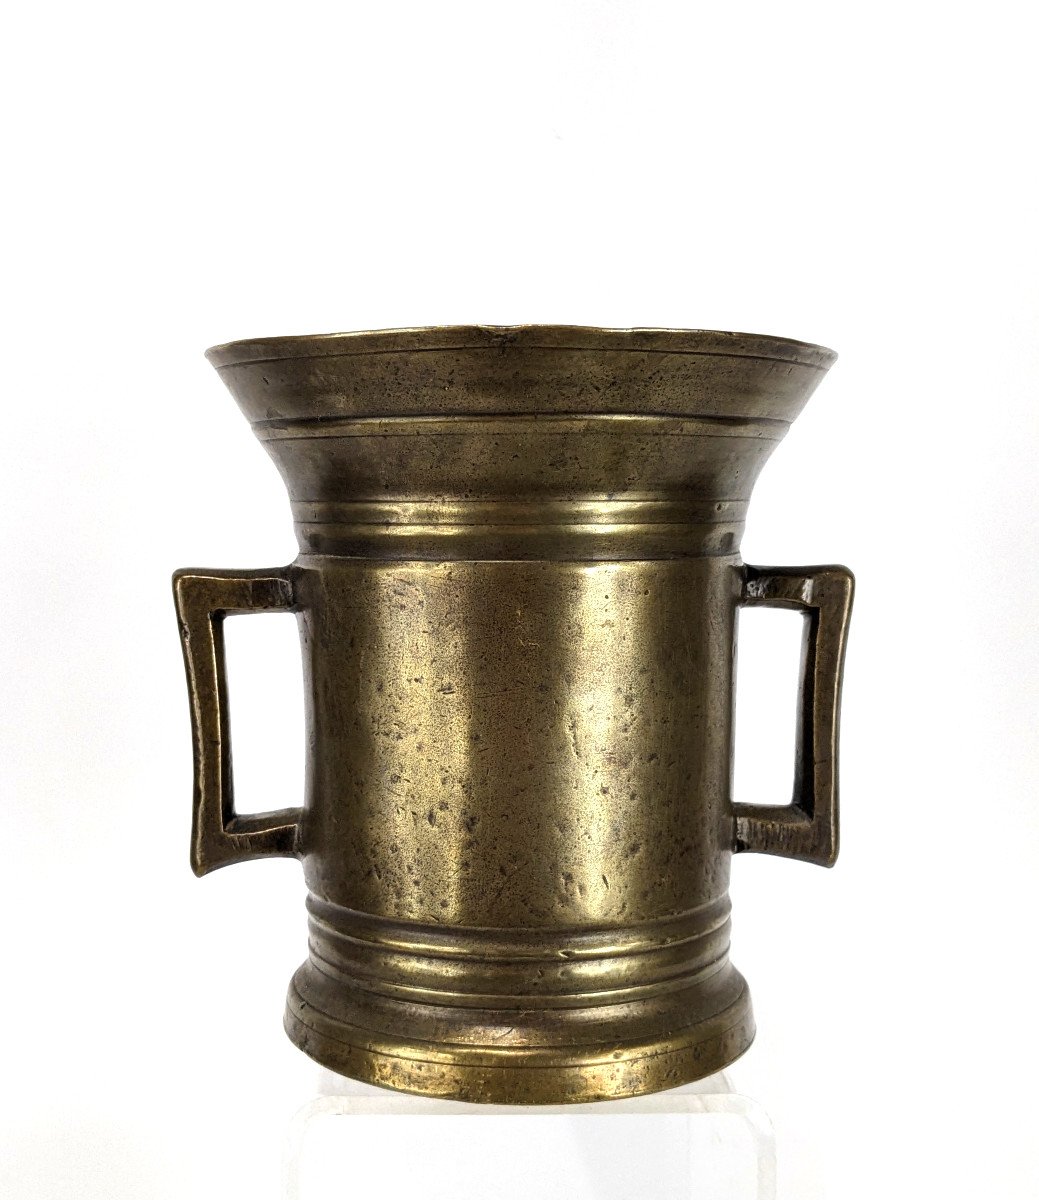 Apothecary Mortar - Bronze - Holland Or Germany 17th Century